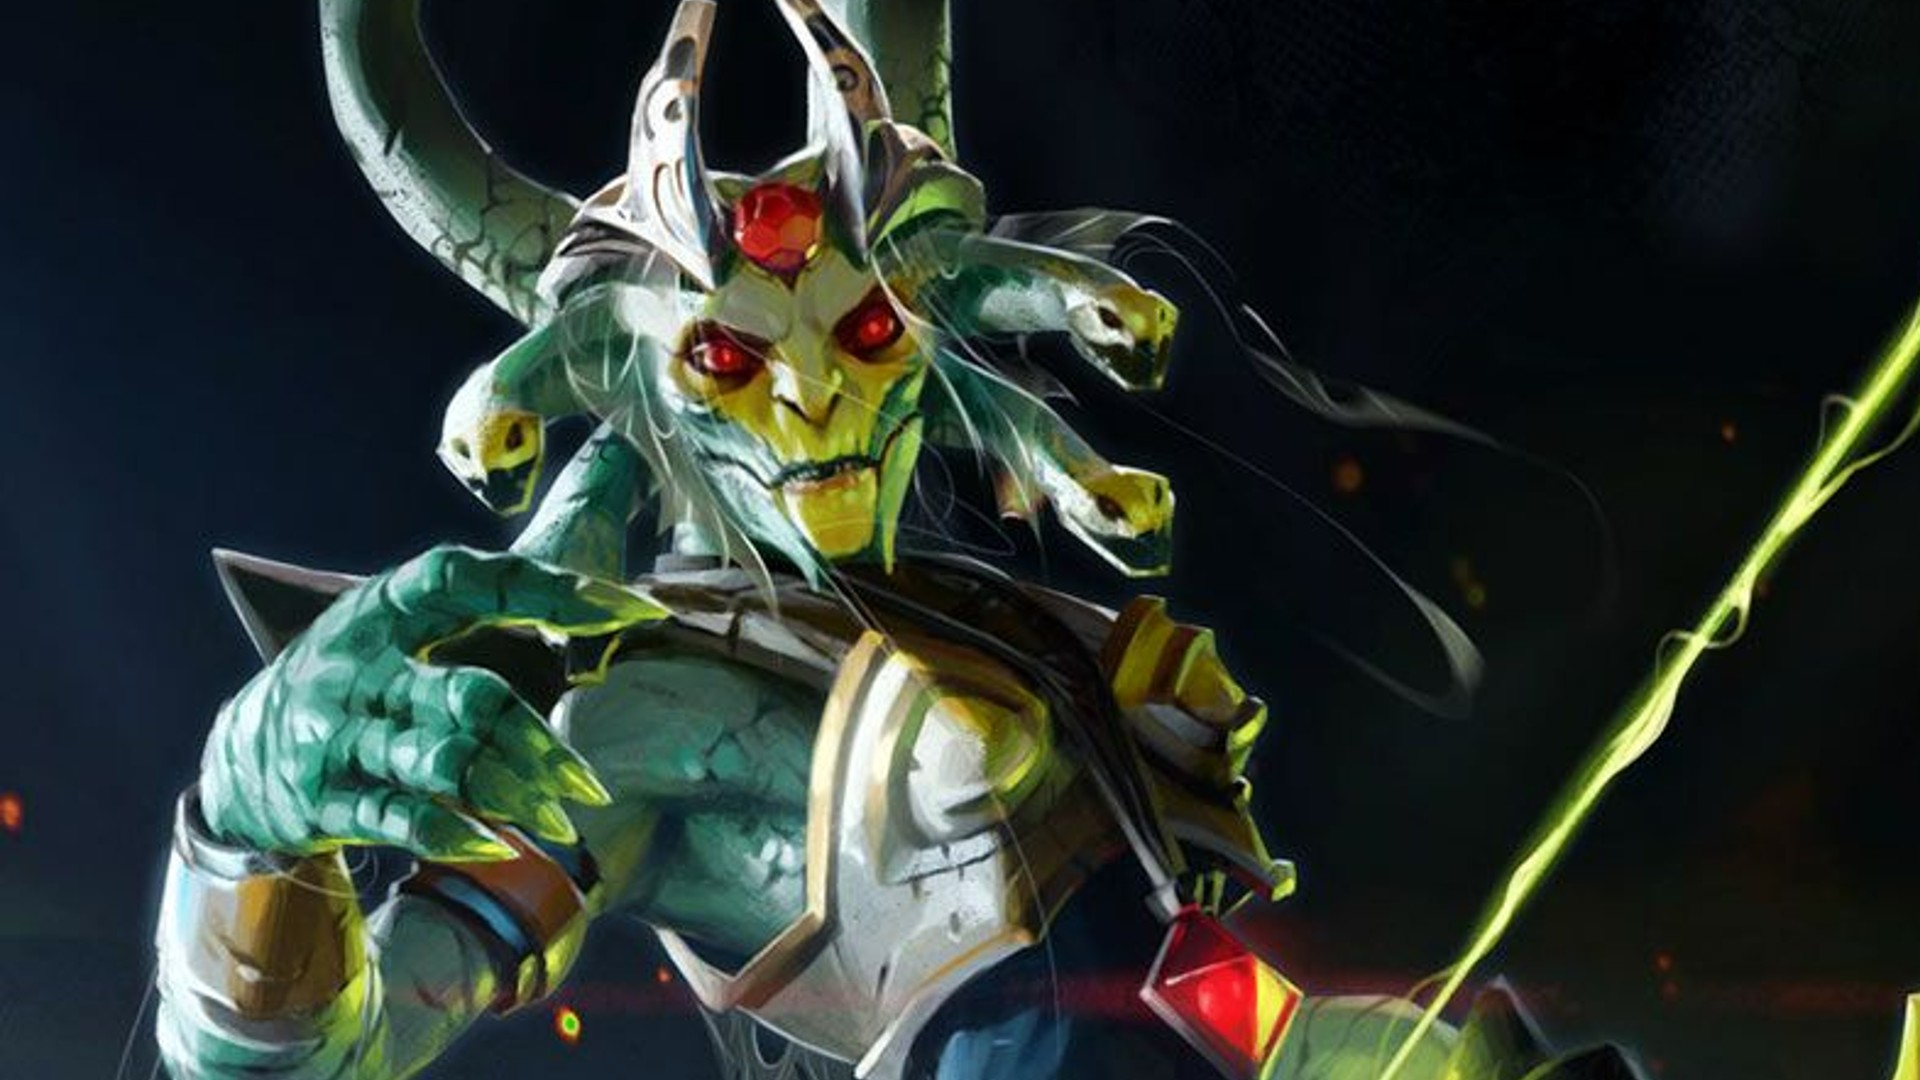 Dota 2 patch clamps down on cheaters as console commands take a hit